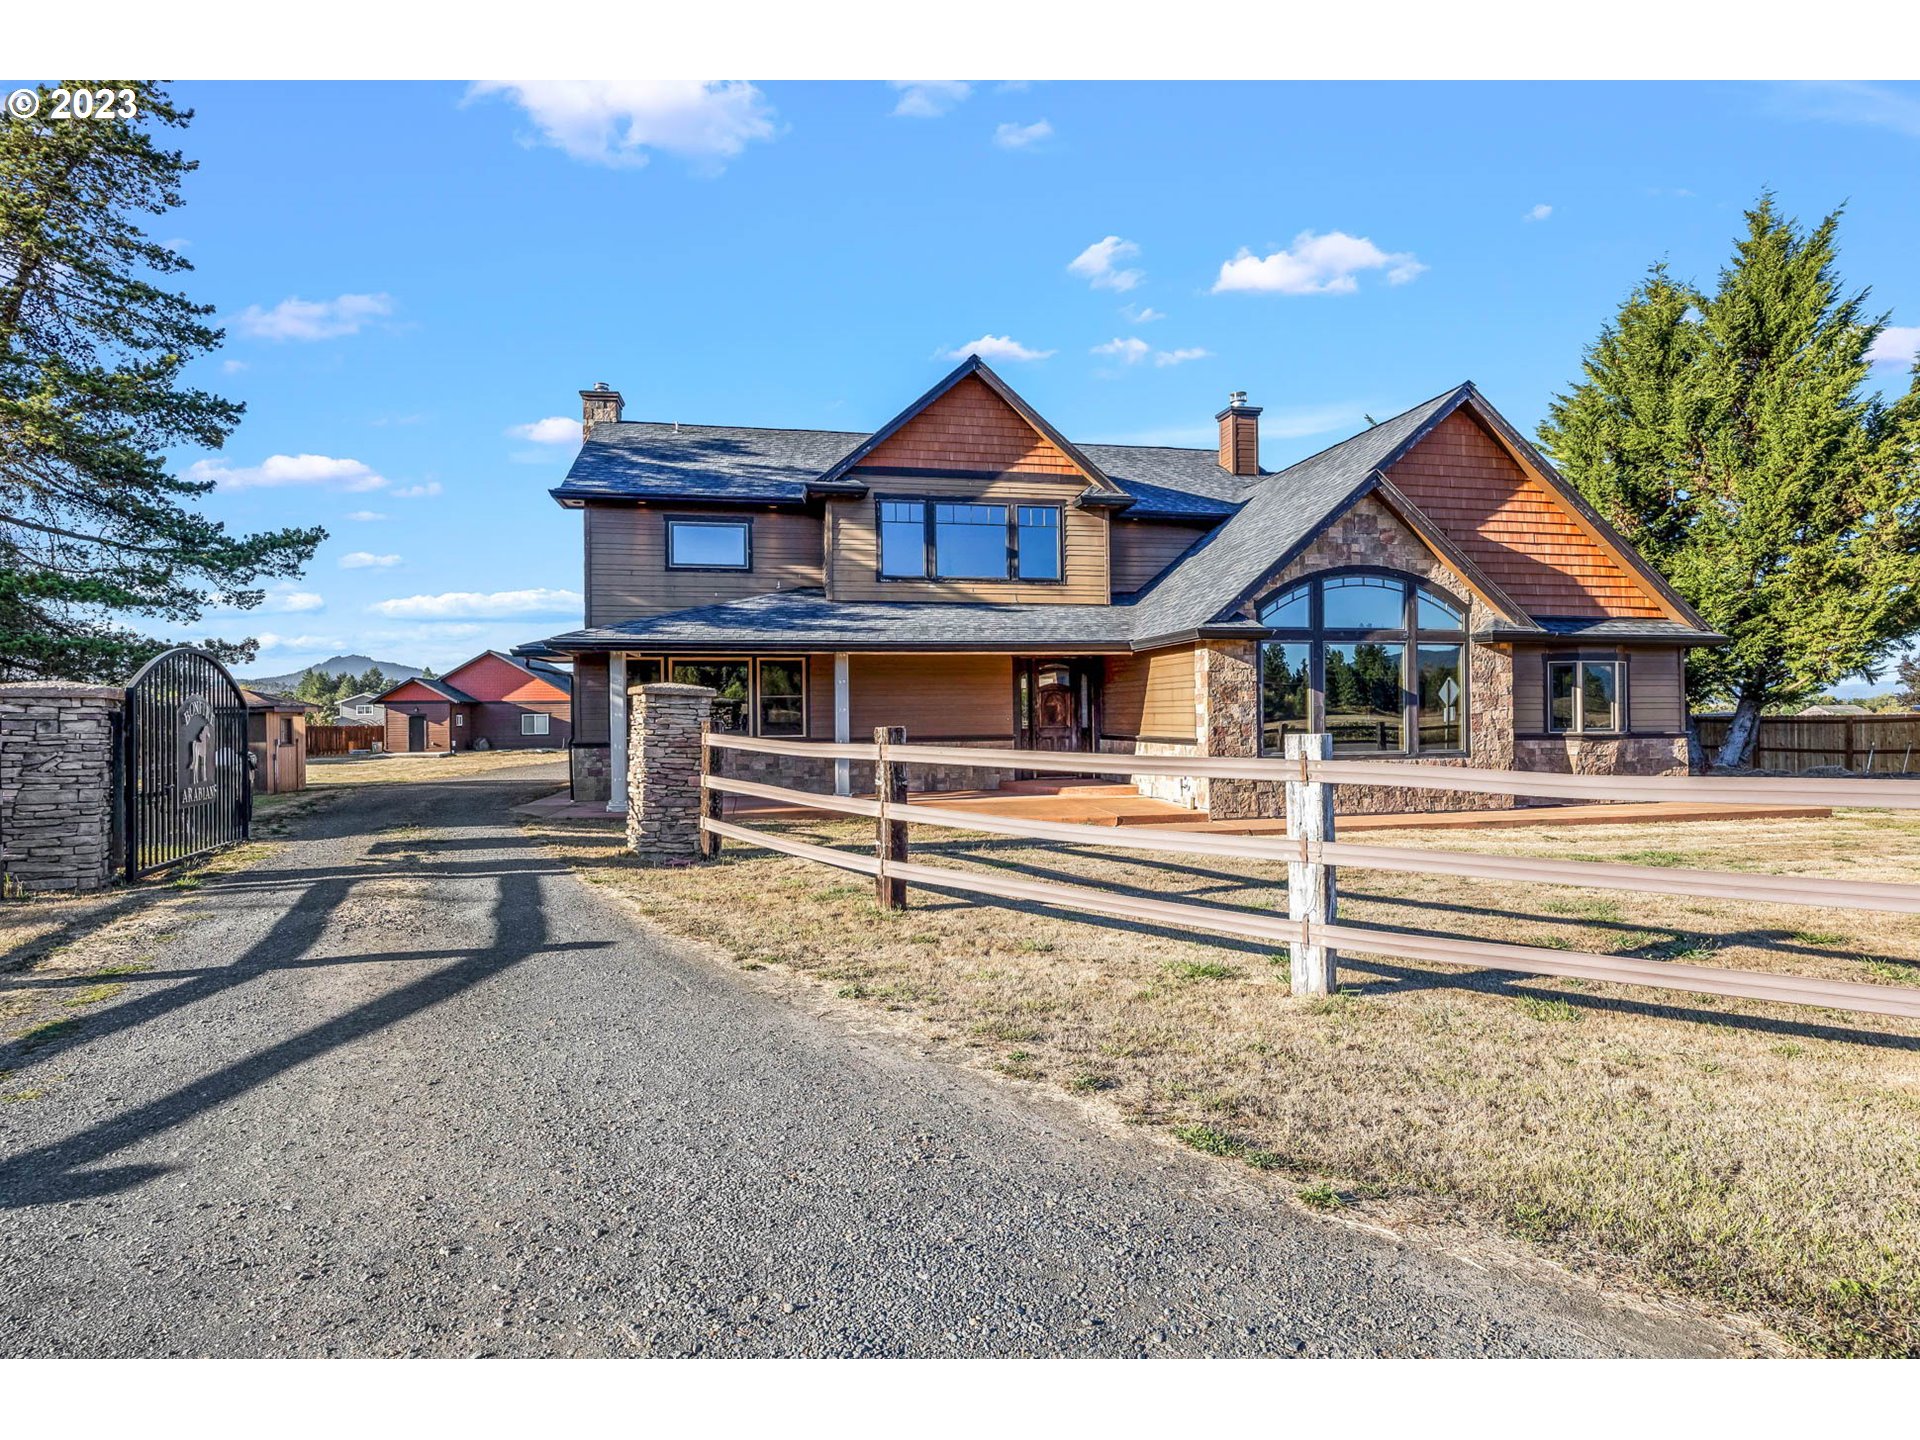 32571 CAMAS SWALE RD, Creswell, OR 